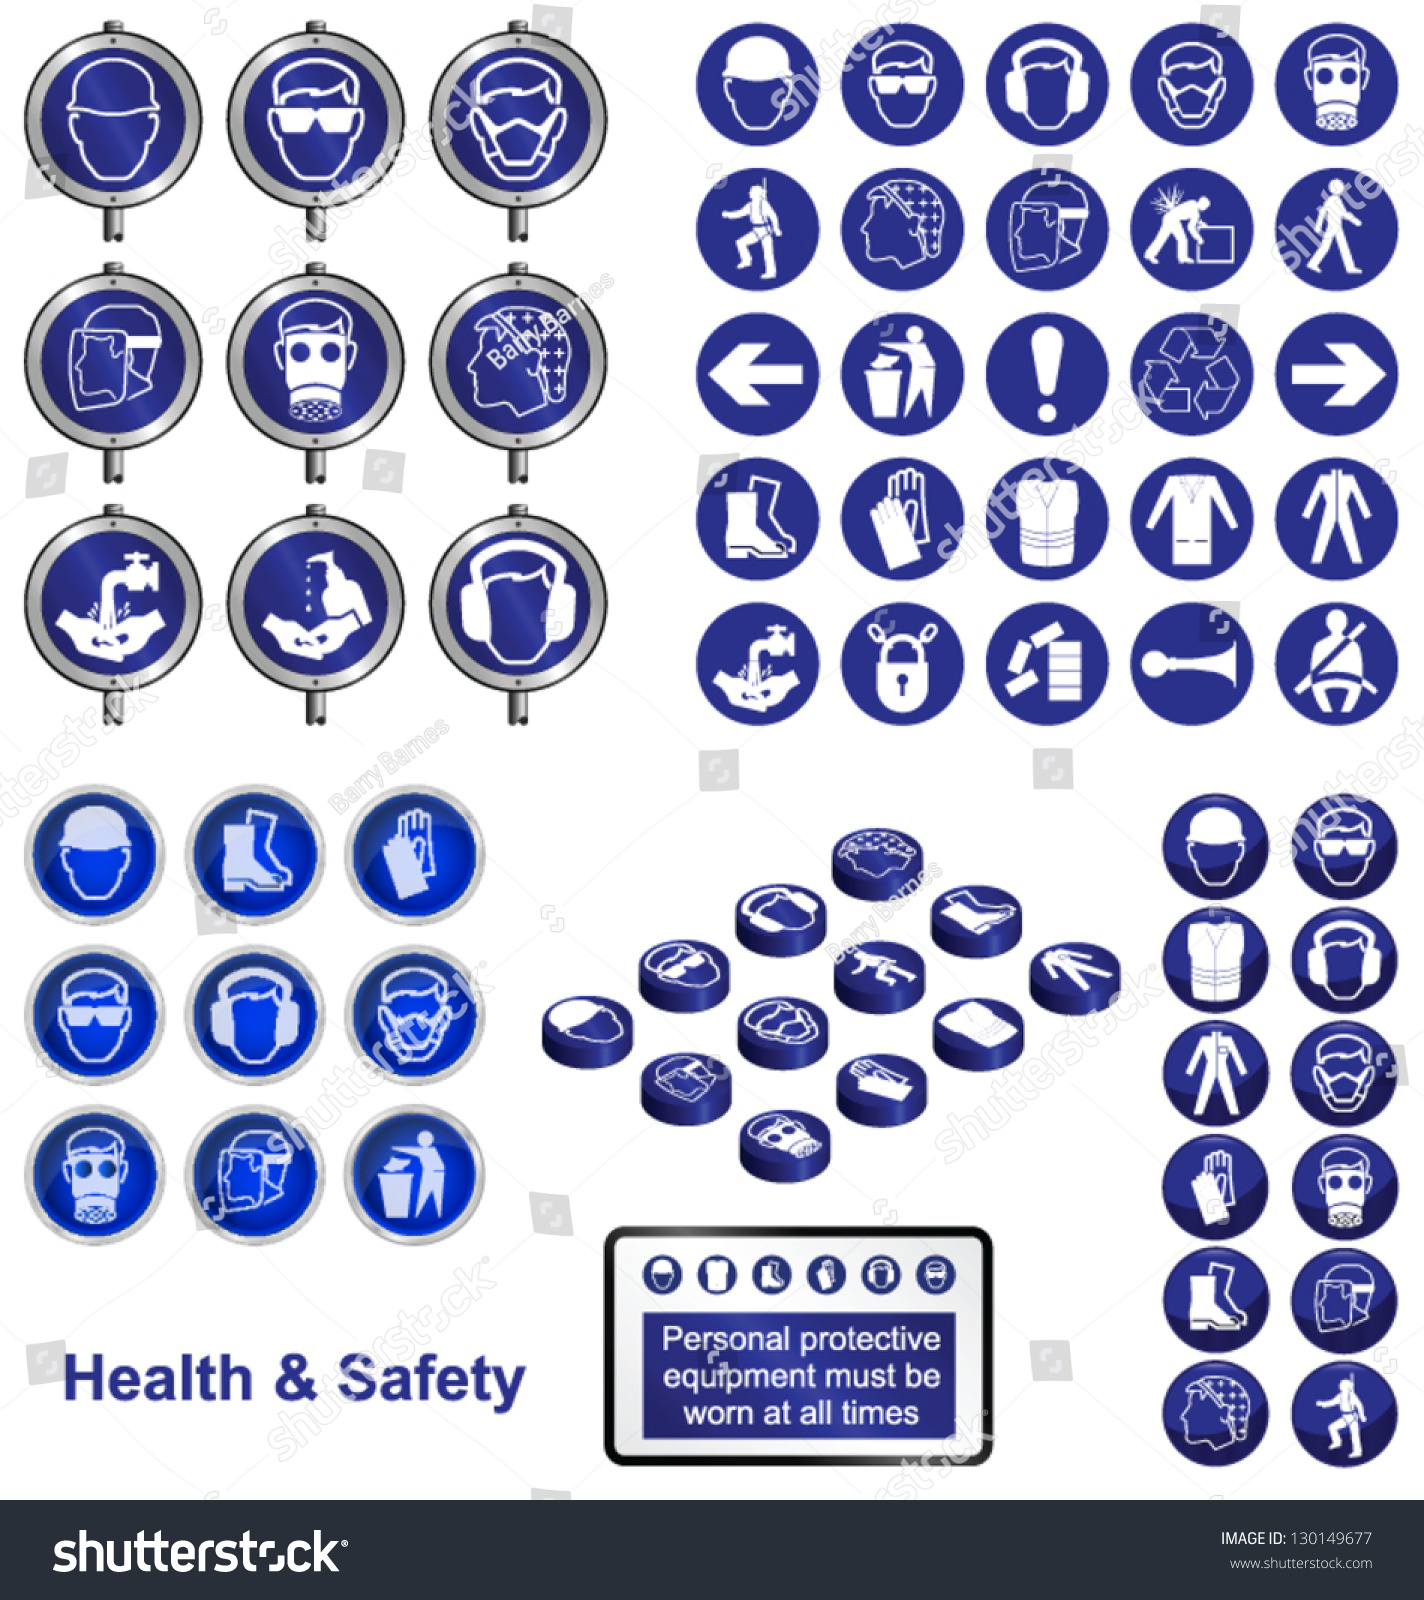 Health Safety Icons Sign Collection Stock Vector 130149677 - Shutterstock